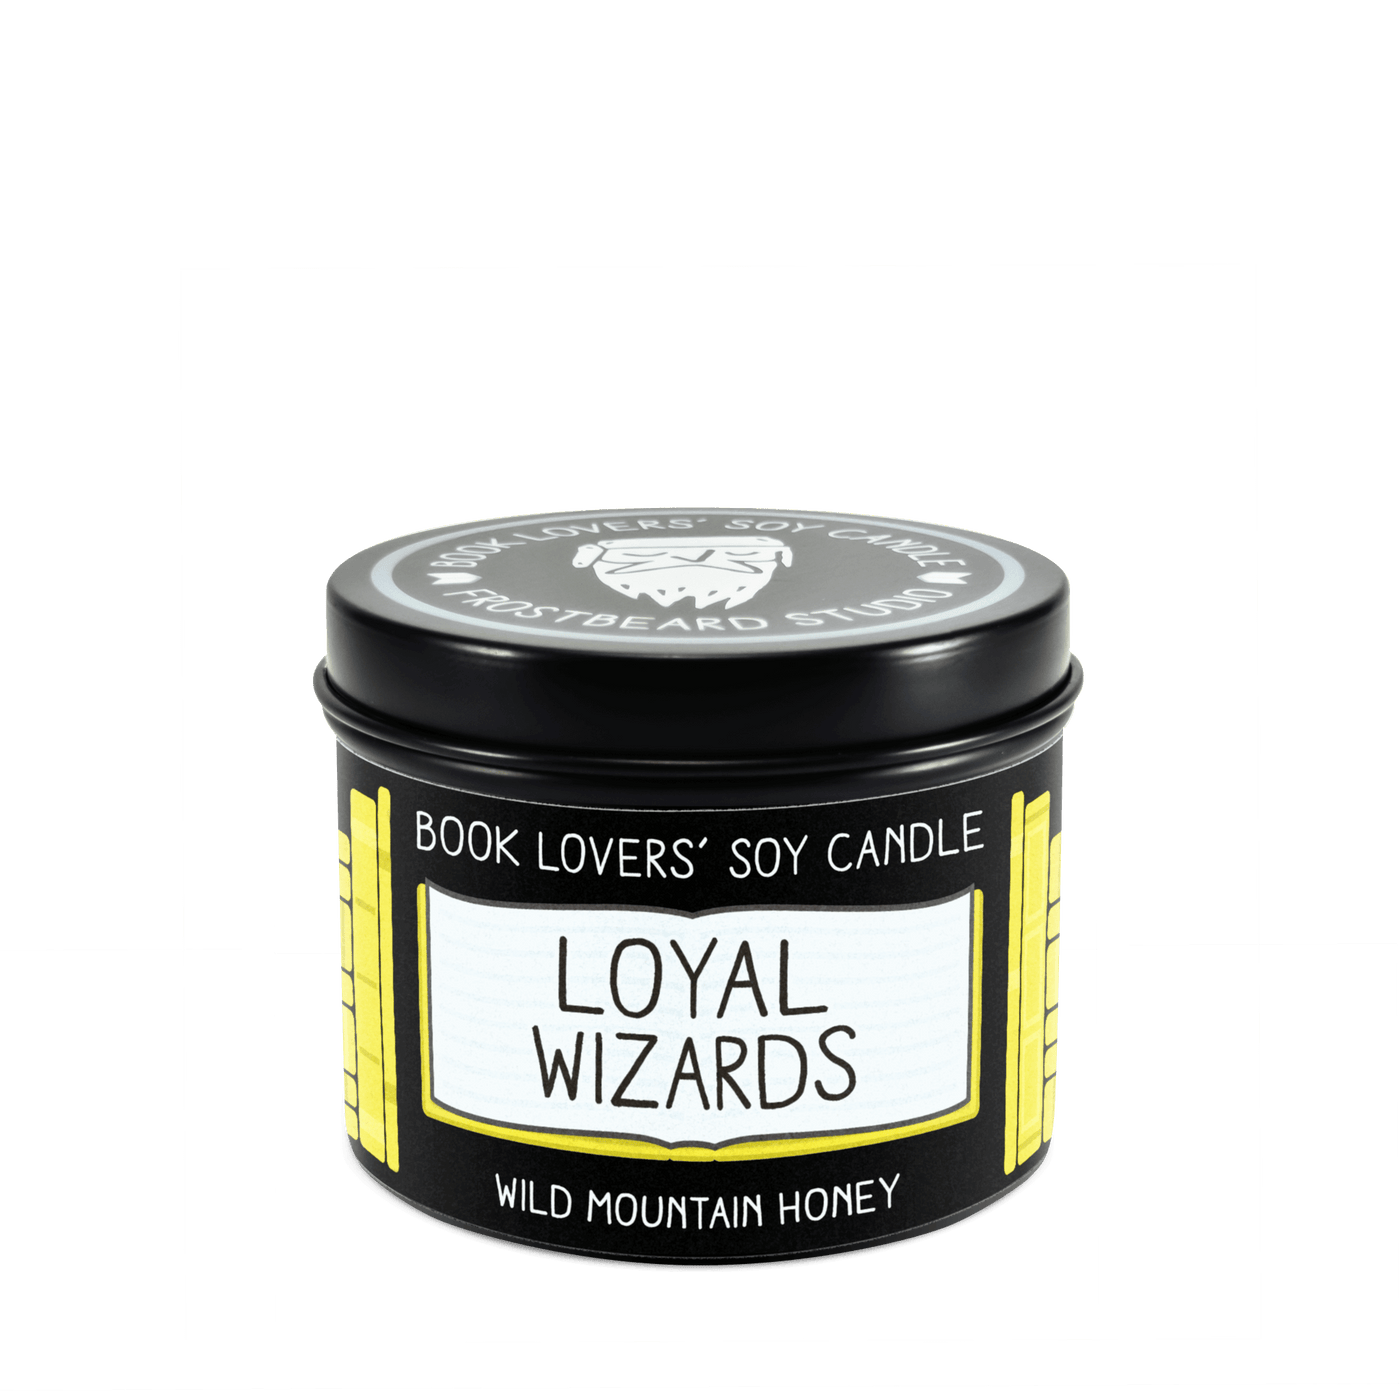 Loyal Wizards - 4 oz Tin - Book Lovers' Soy Candle - Frostbeard Studio